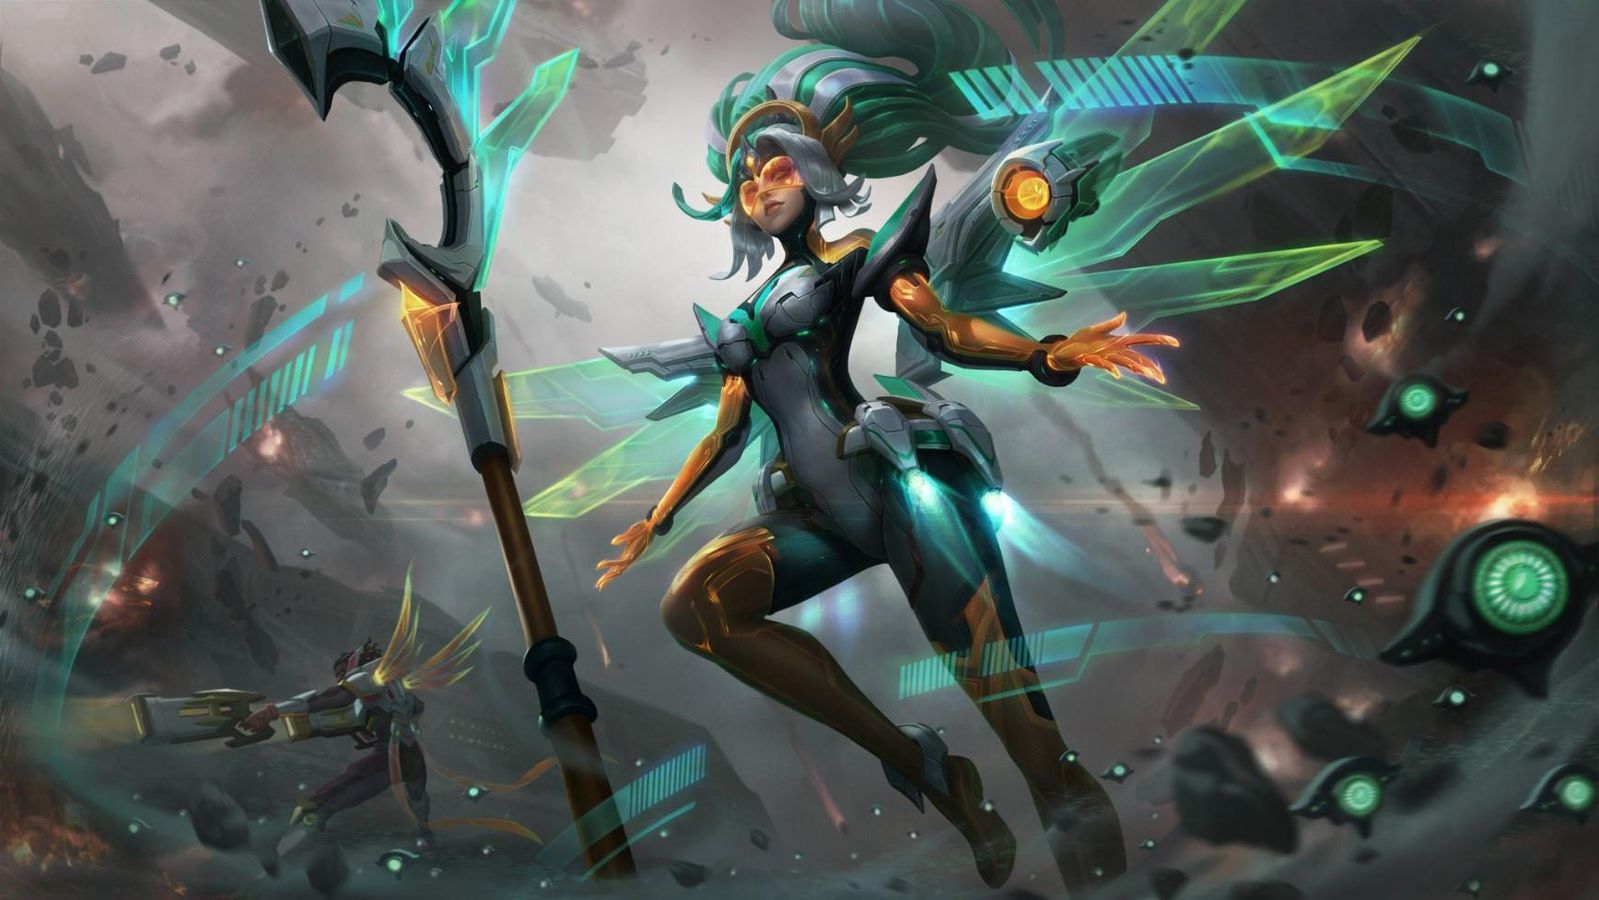 LoL 12.16 Skins: Steel Valkyries Camille, Lucian, Nasus & Janna - Art, Animations & more - Cyber Halo Janna